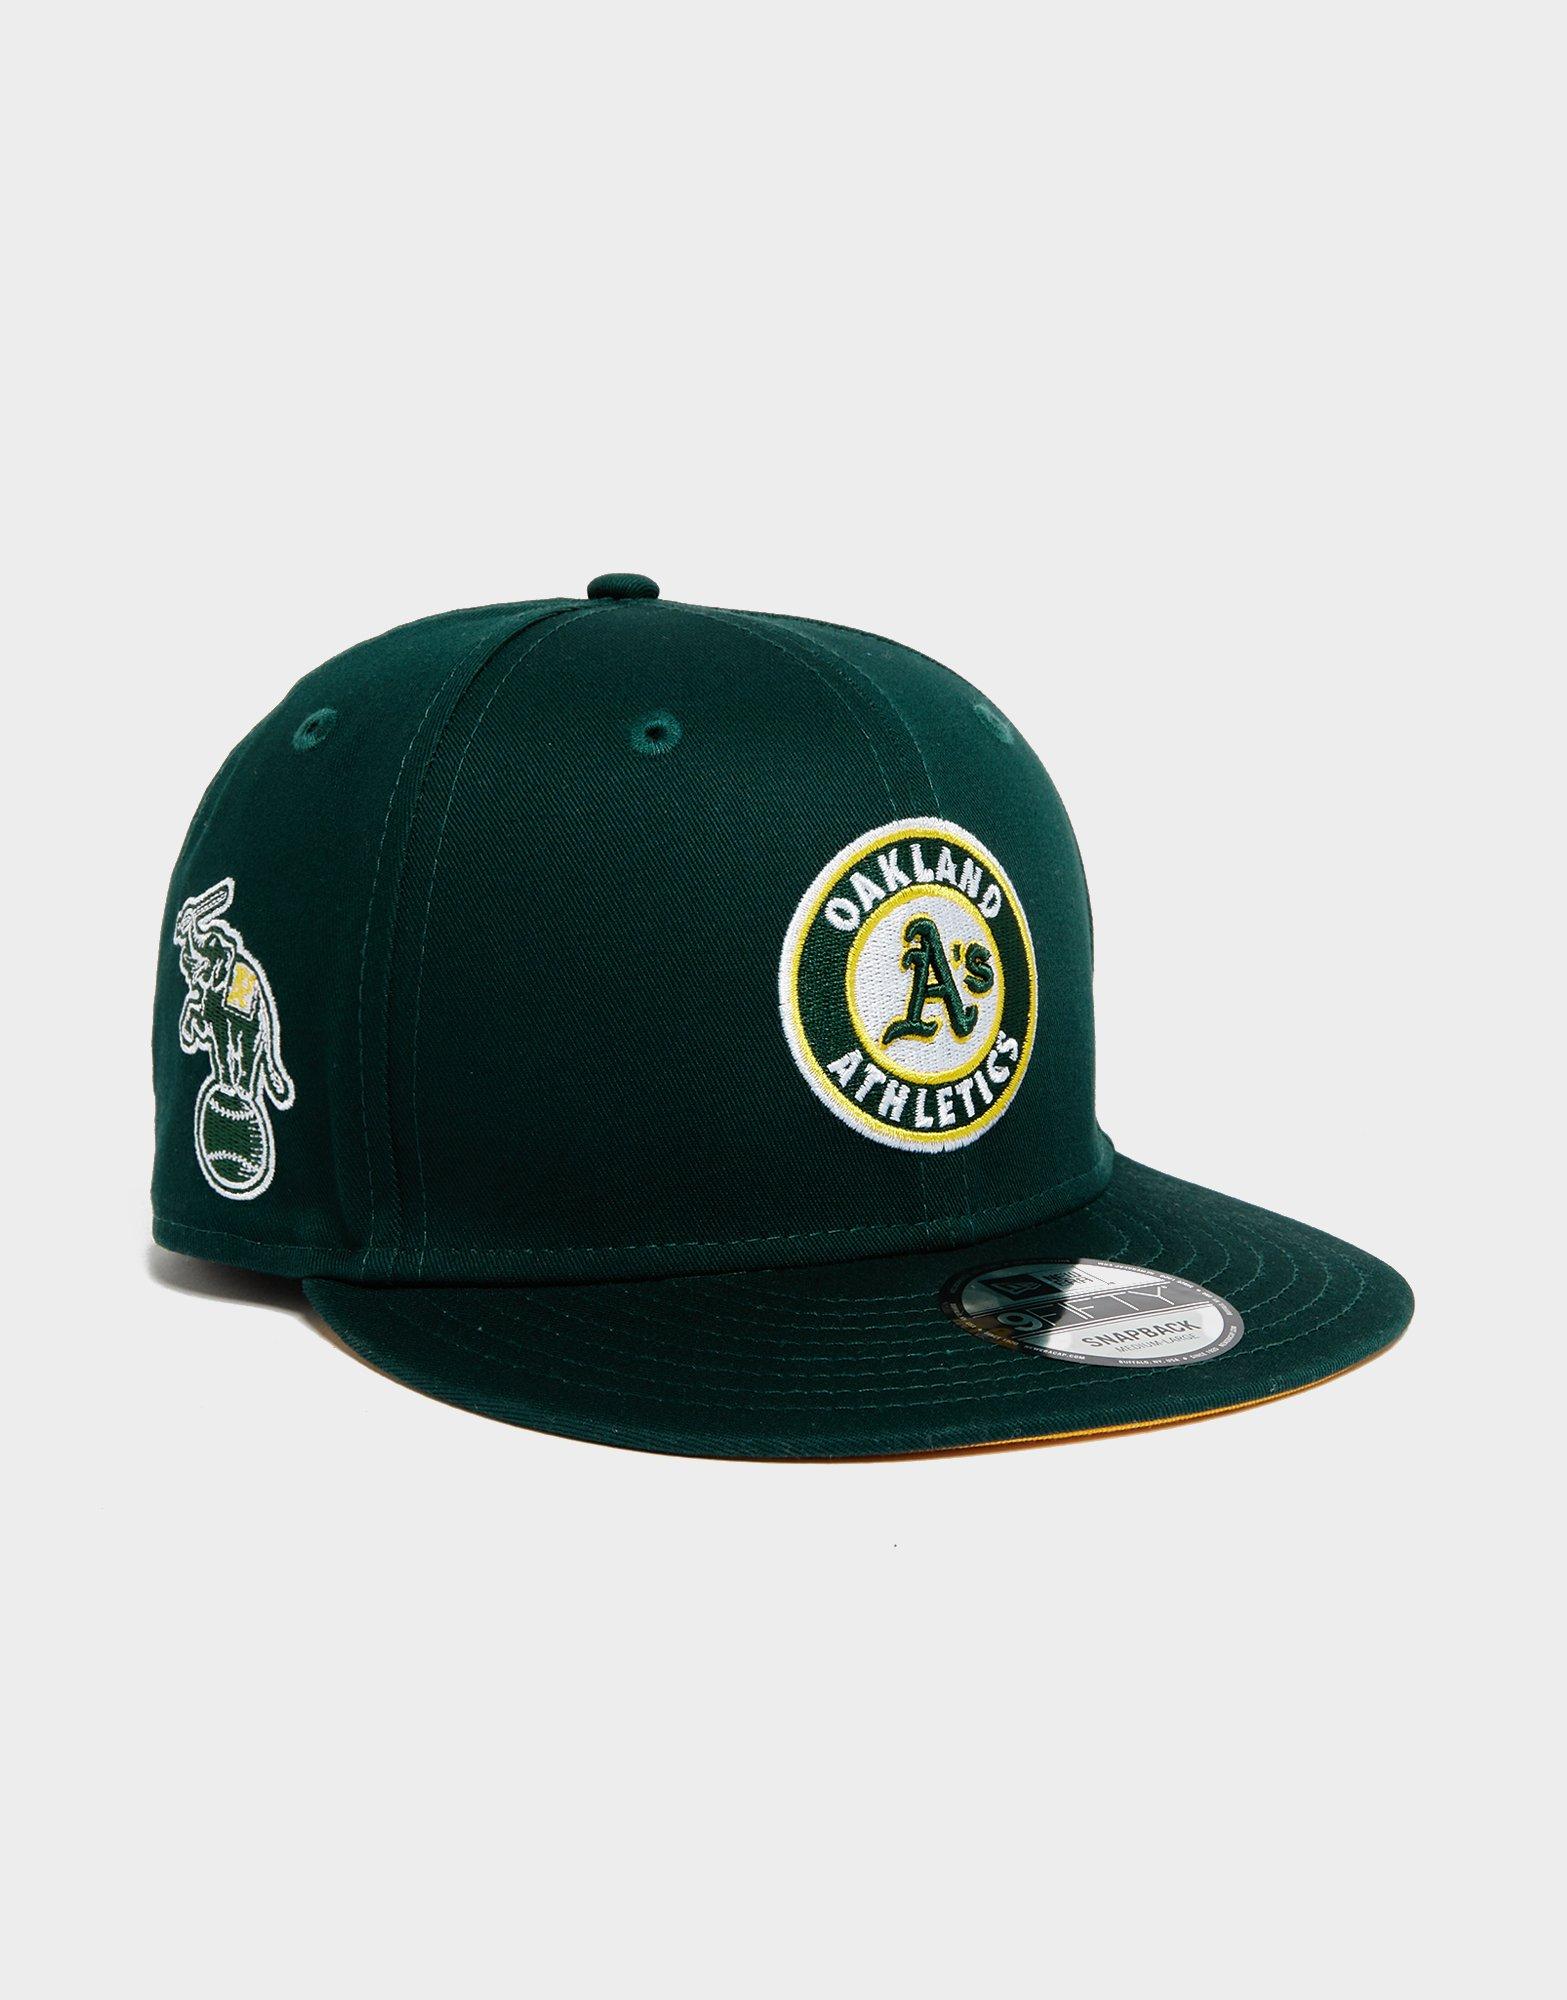 Oakland A’s Elephant New Era 59FIFTY Fitted Hat Green 7 1/8 On Field Cap NWT